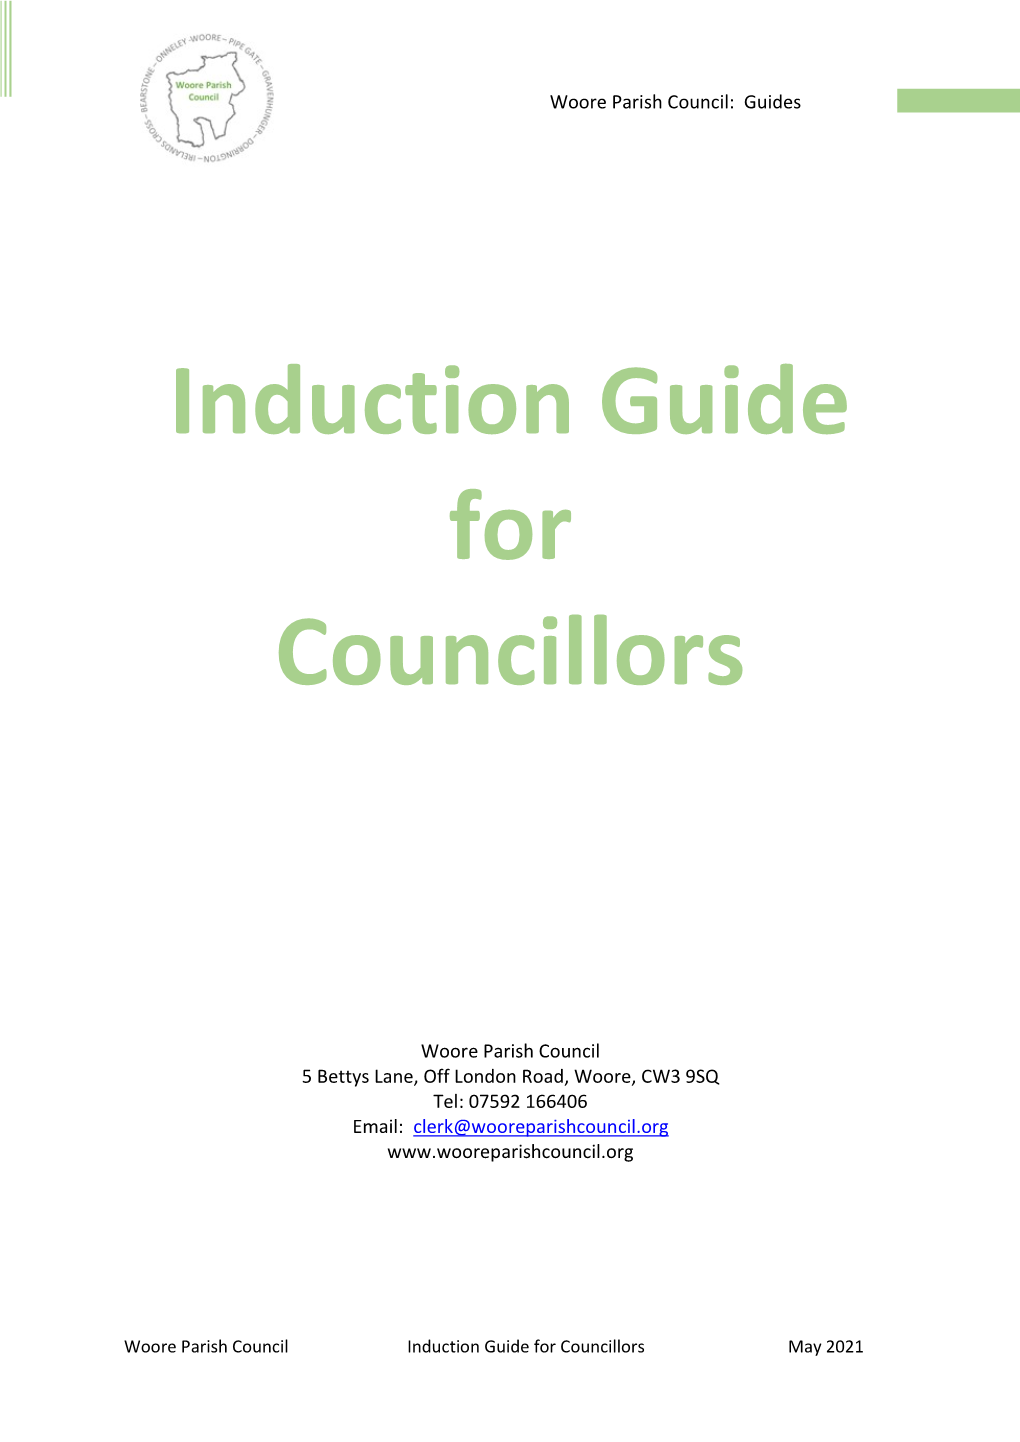 Induction Guide for Councillors